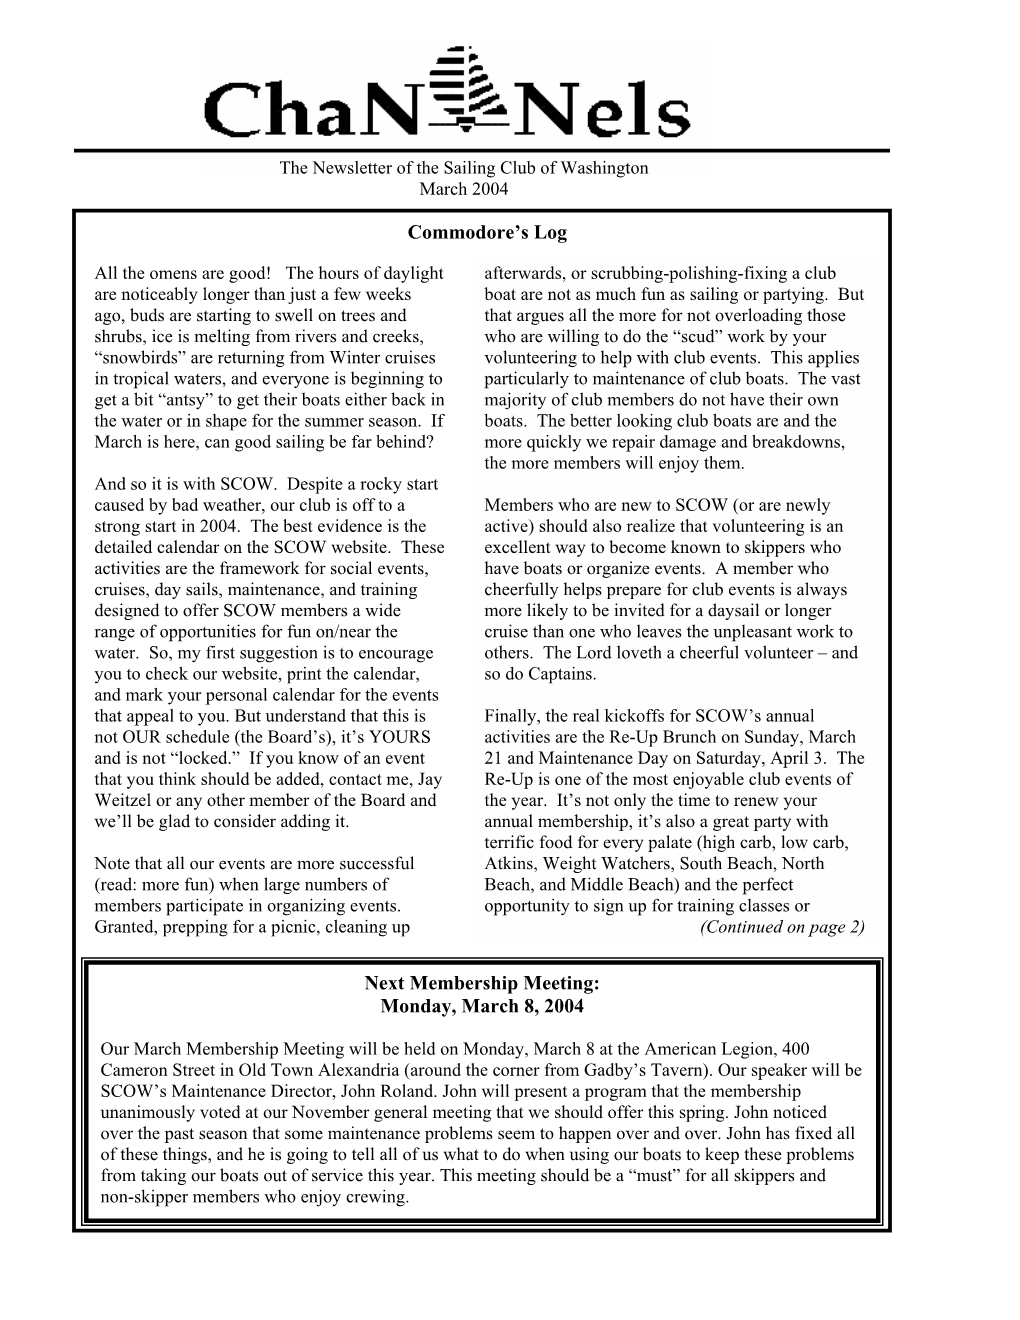 Channels, the Newsletter of the Sailing Club of Washington